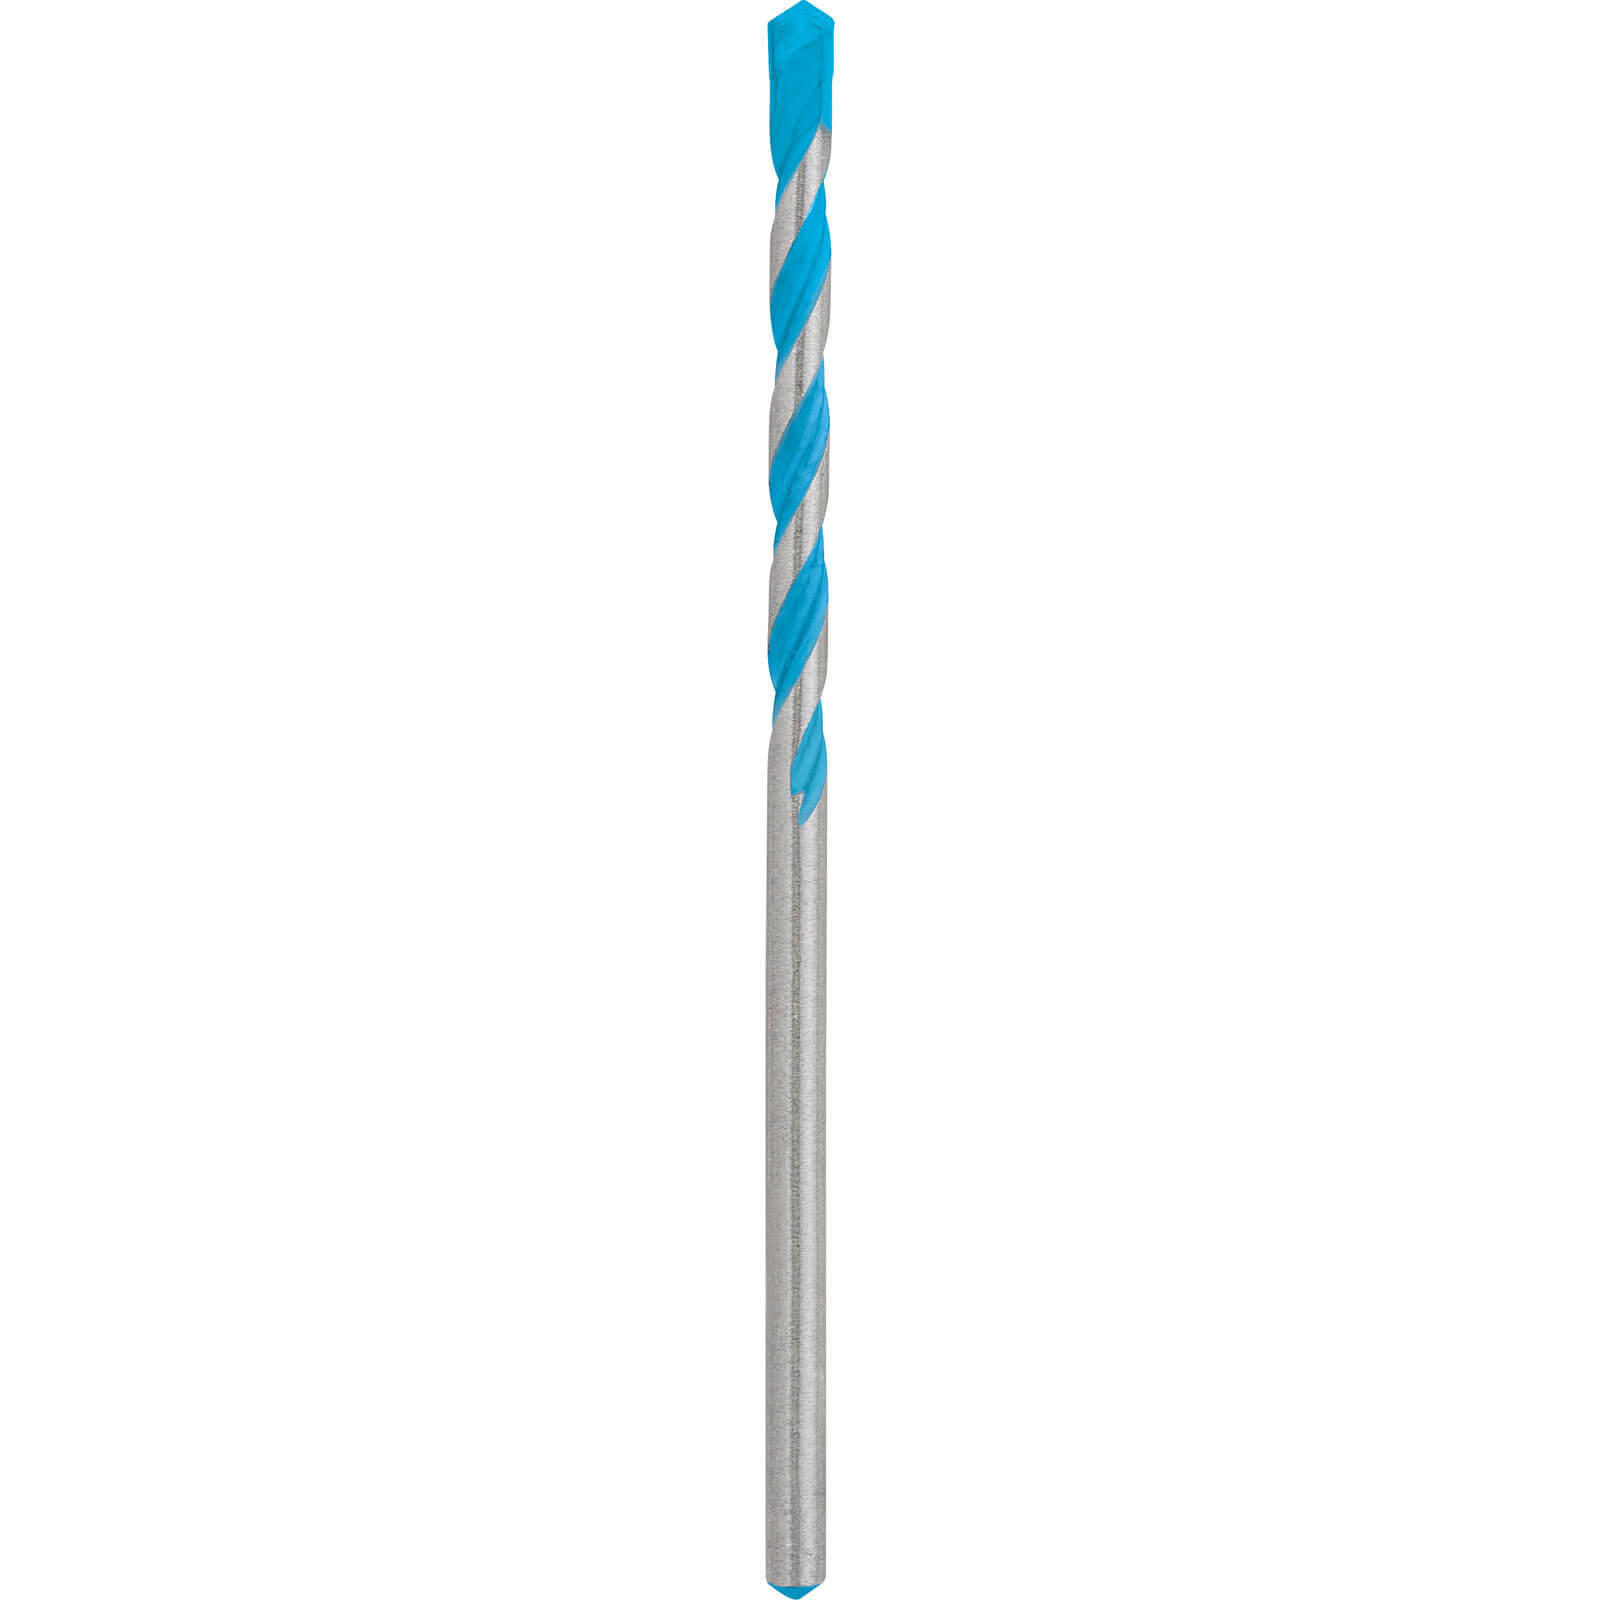 Photo of Bosch Expert Cyl-9 Multi Construction Drill Bit 14mm 200mm Pack Of 1